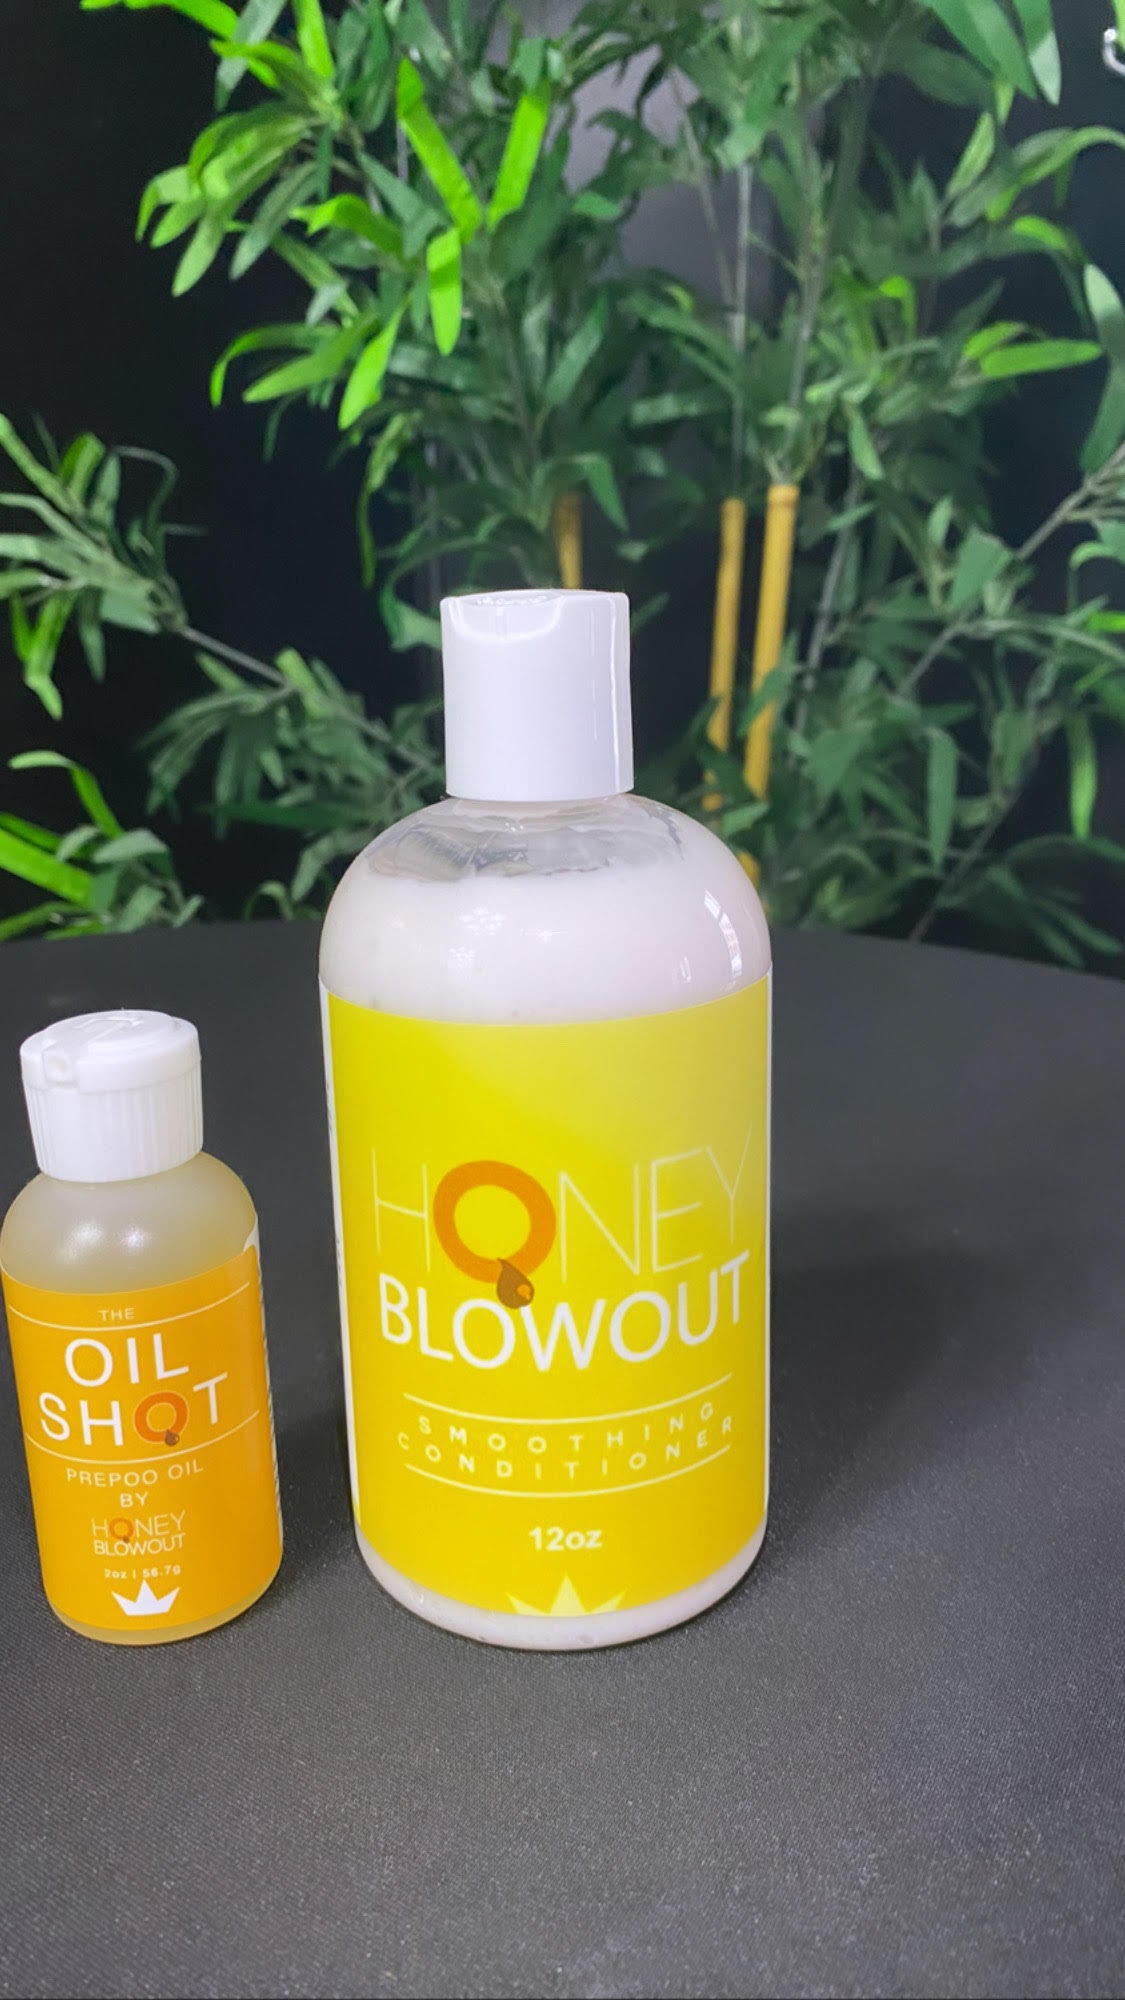 Duo Deals THE OIL SHOT + HONEYBLOWOUT